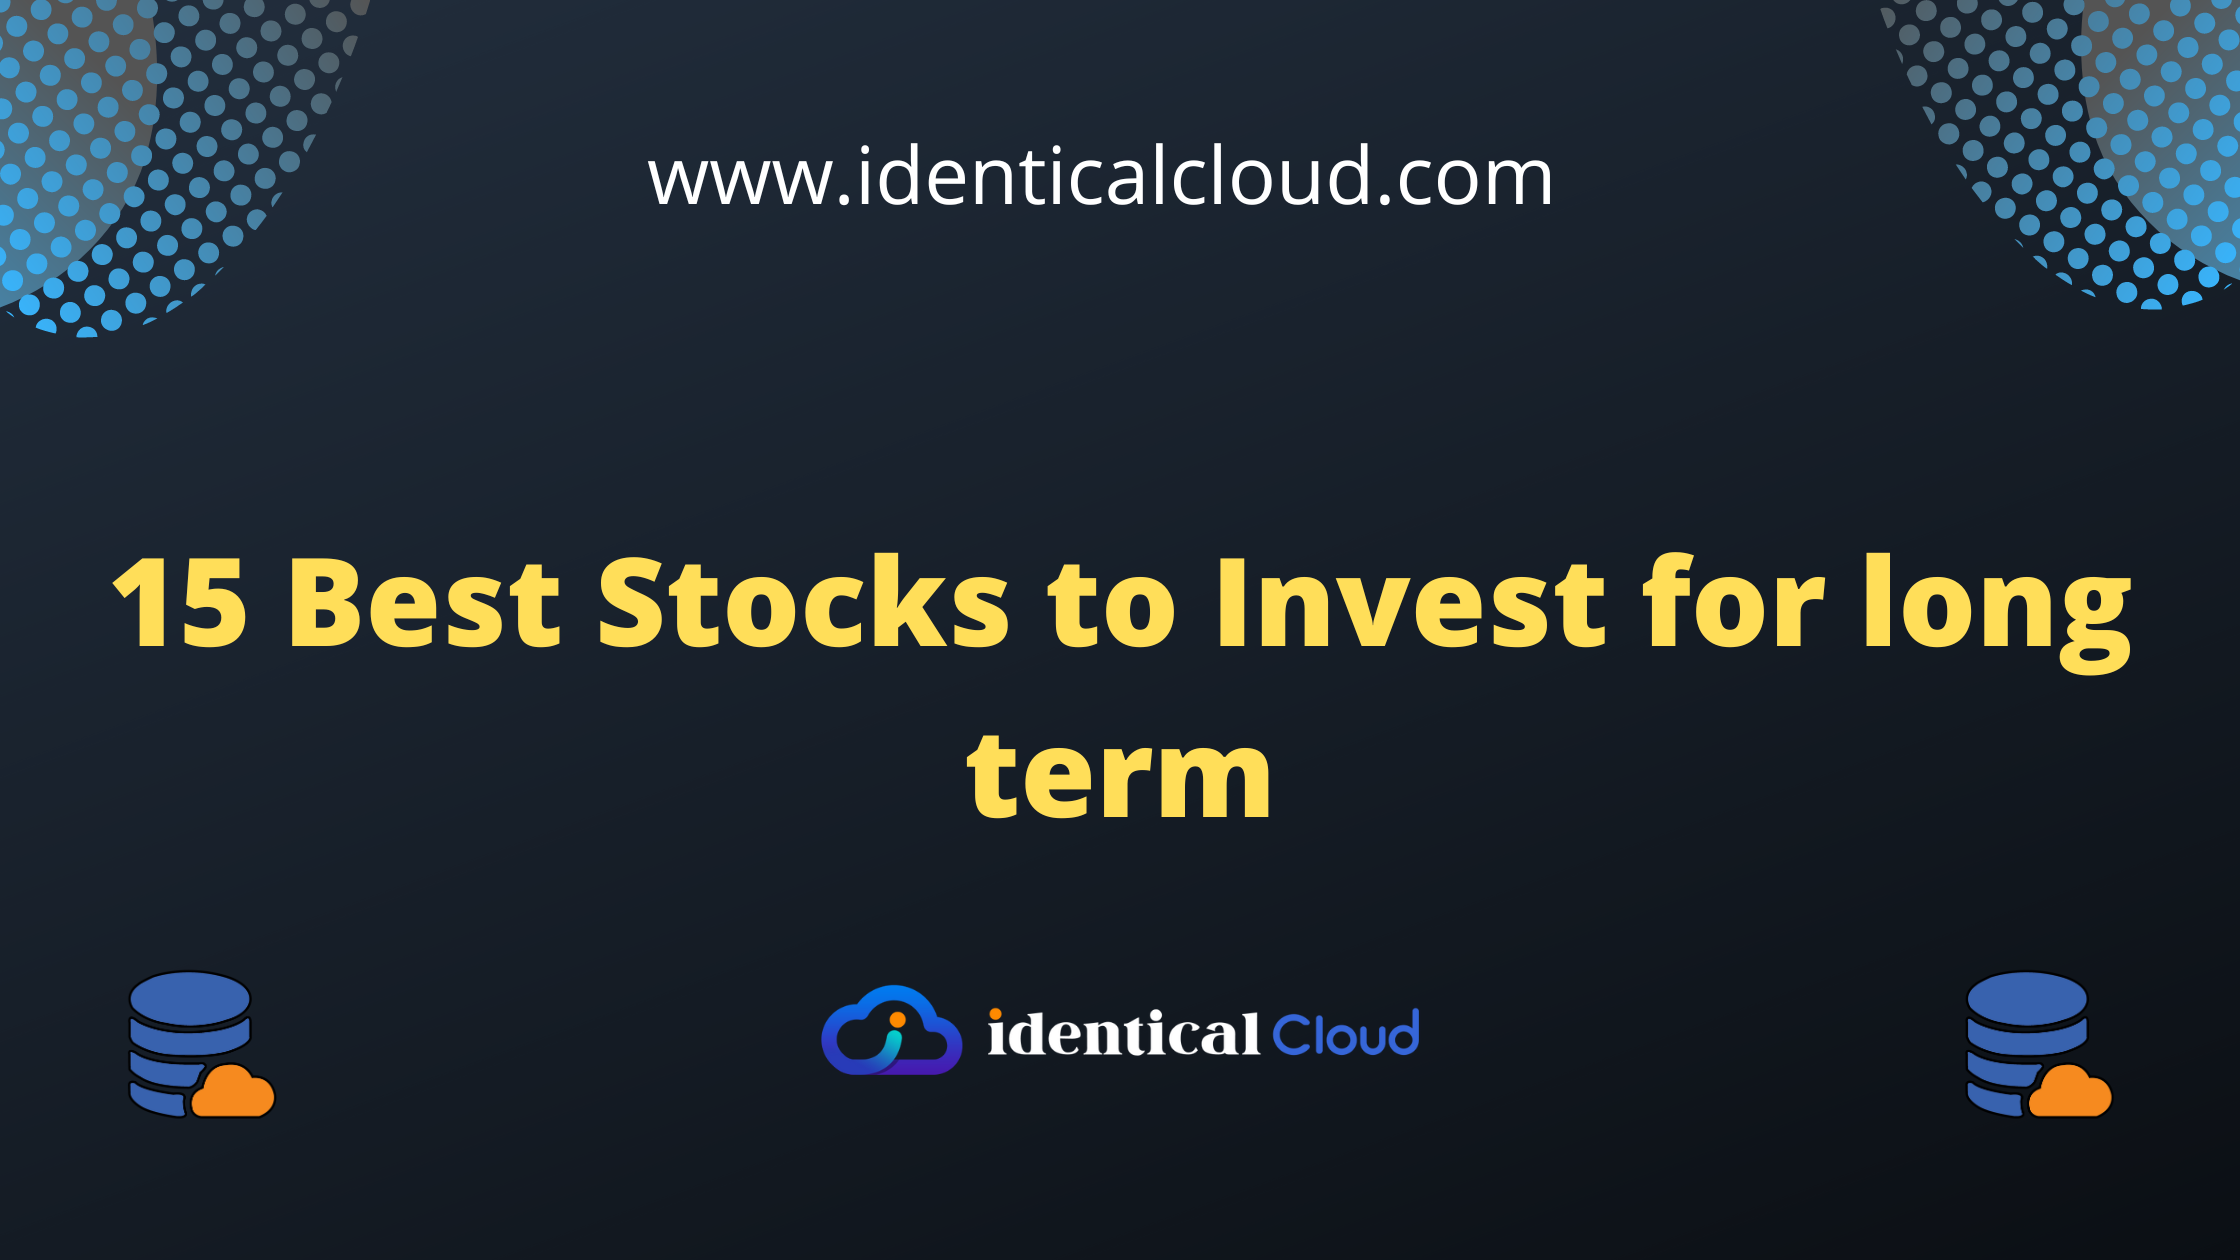 15 Best Stocks to invest for long term - identicalcloud.com